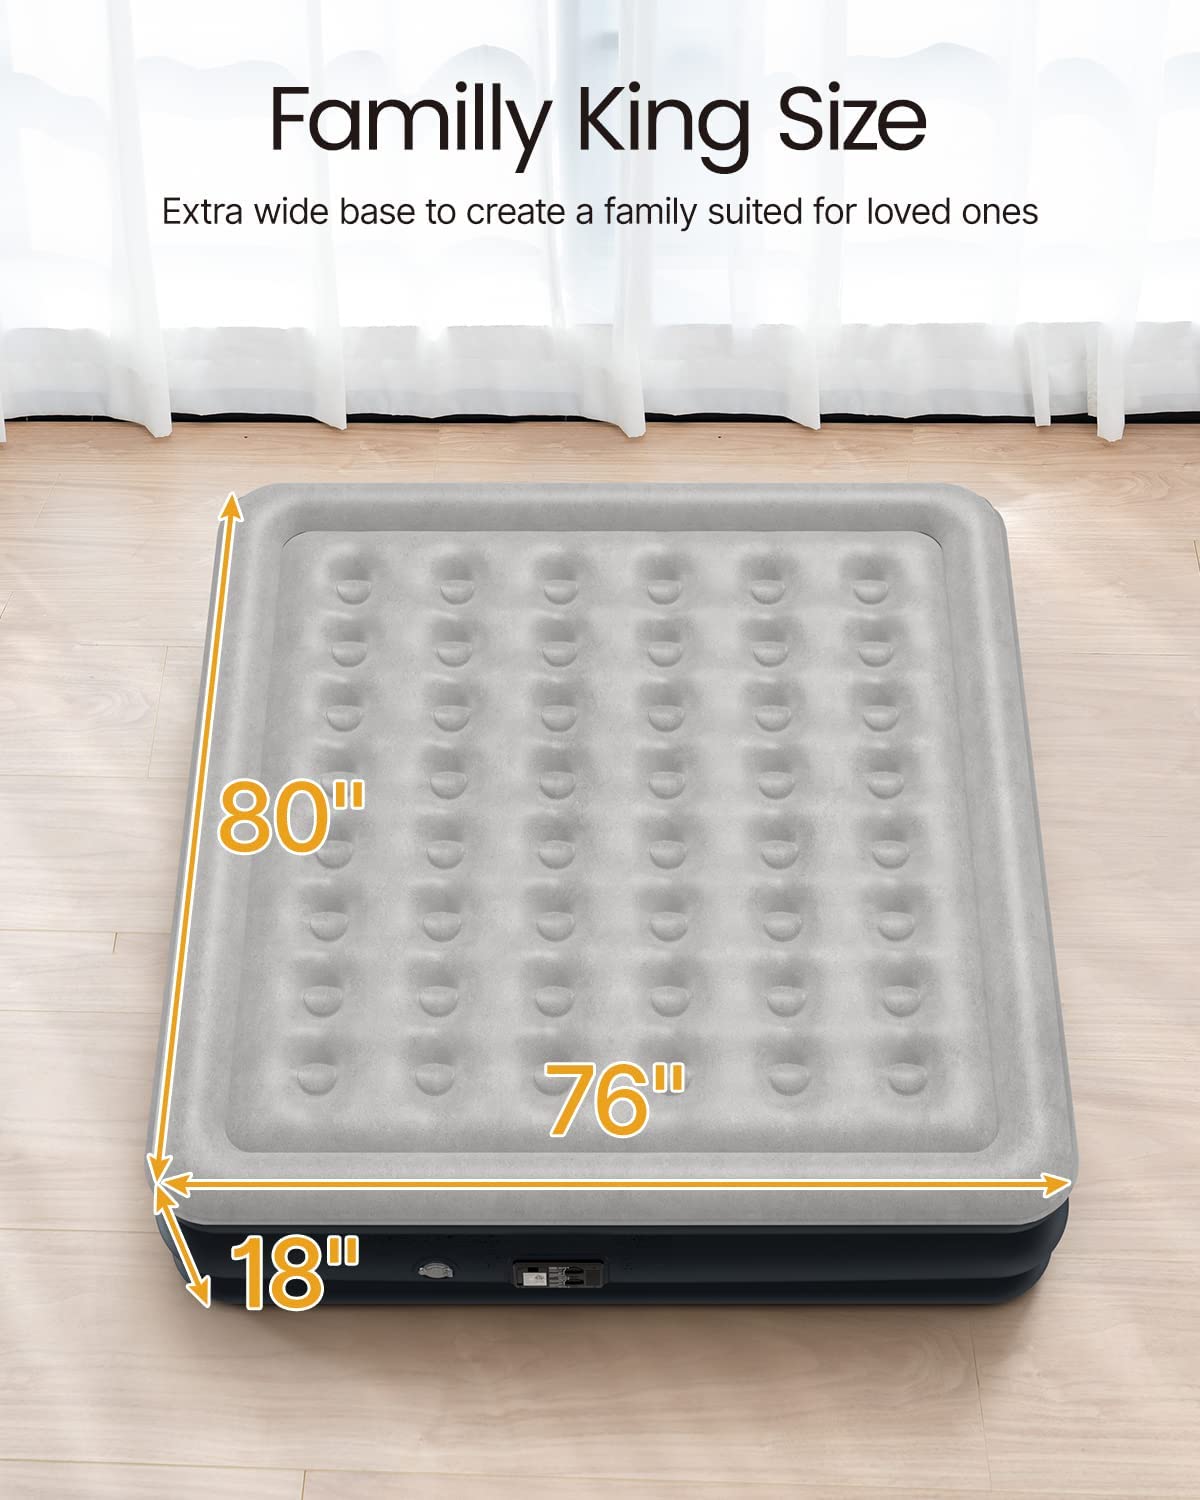 King Size 18" Air Mattress - Air Bed king by idoo